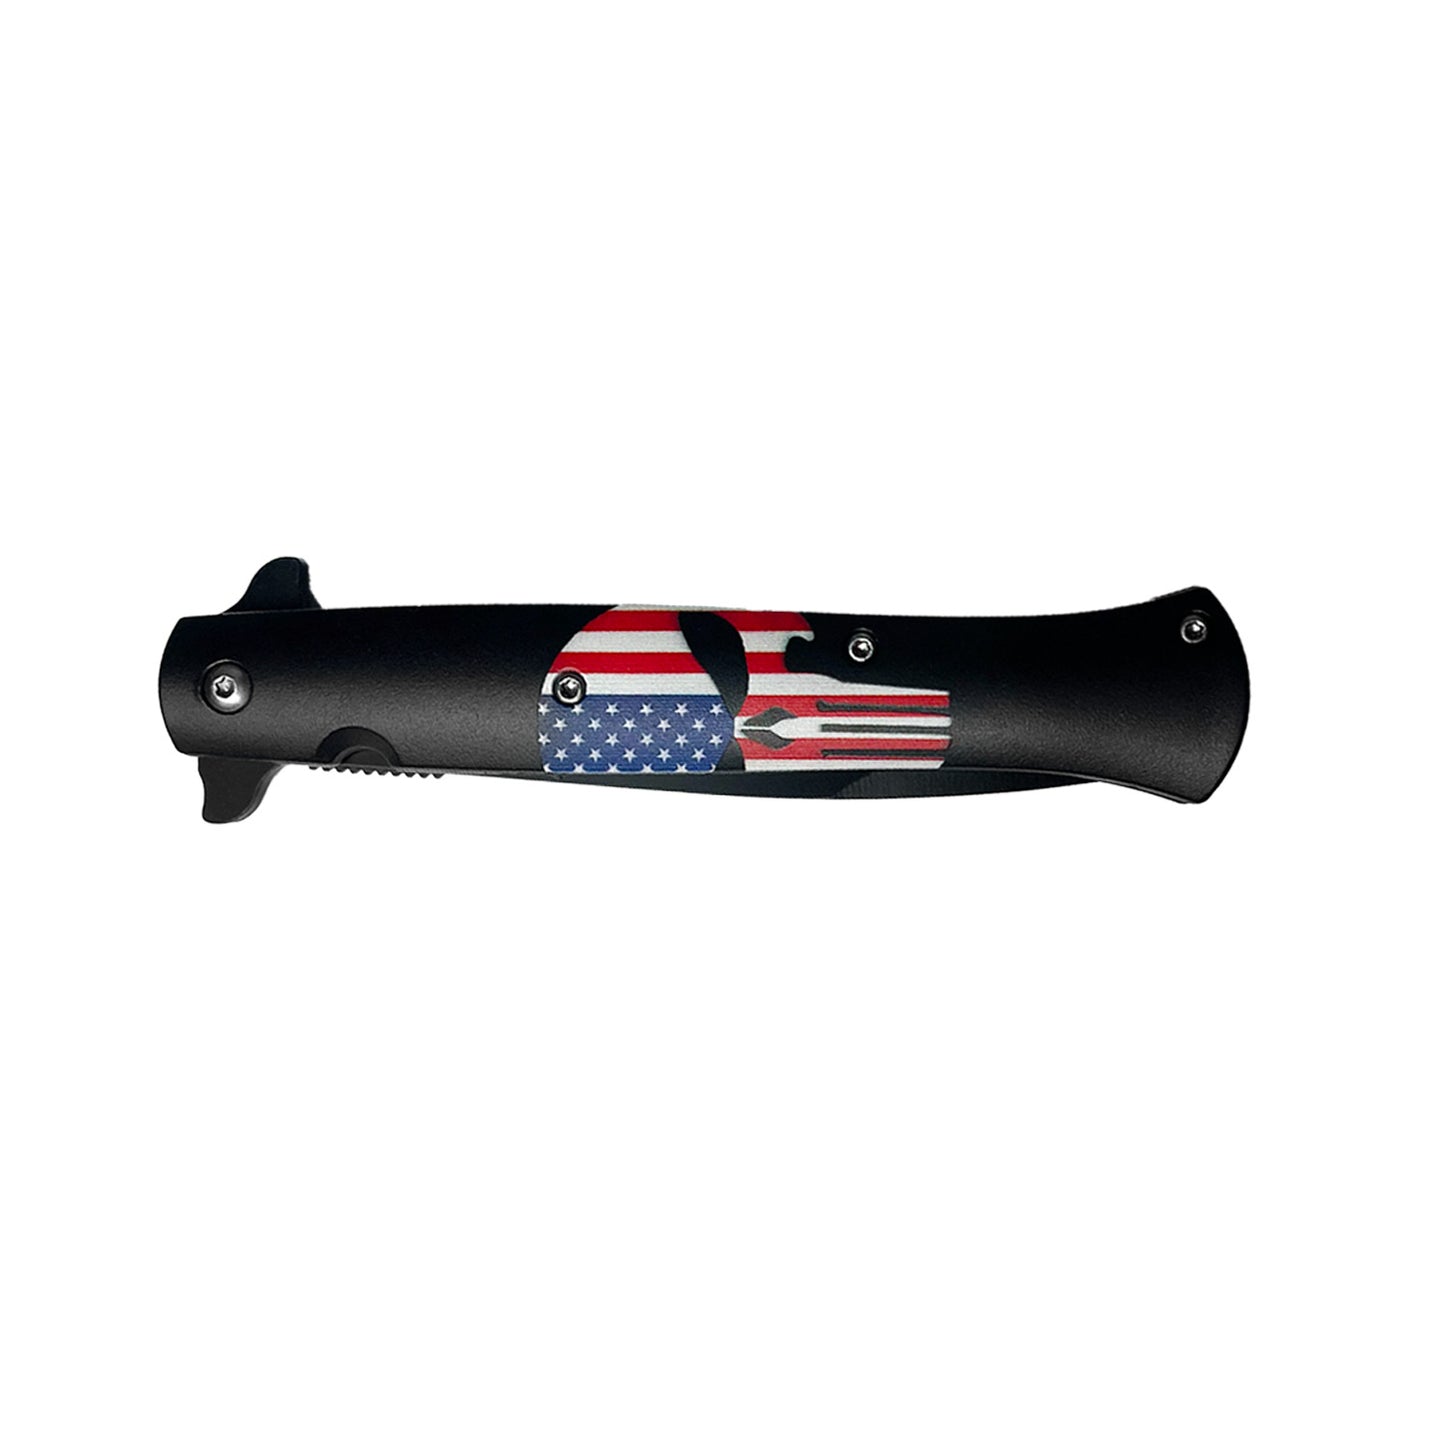 8 7/8" Overall Spring Assisted Knife Handle w/Flag & Skull